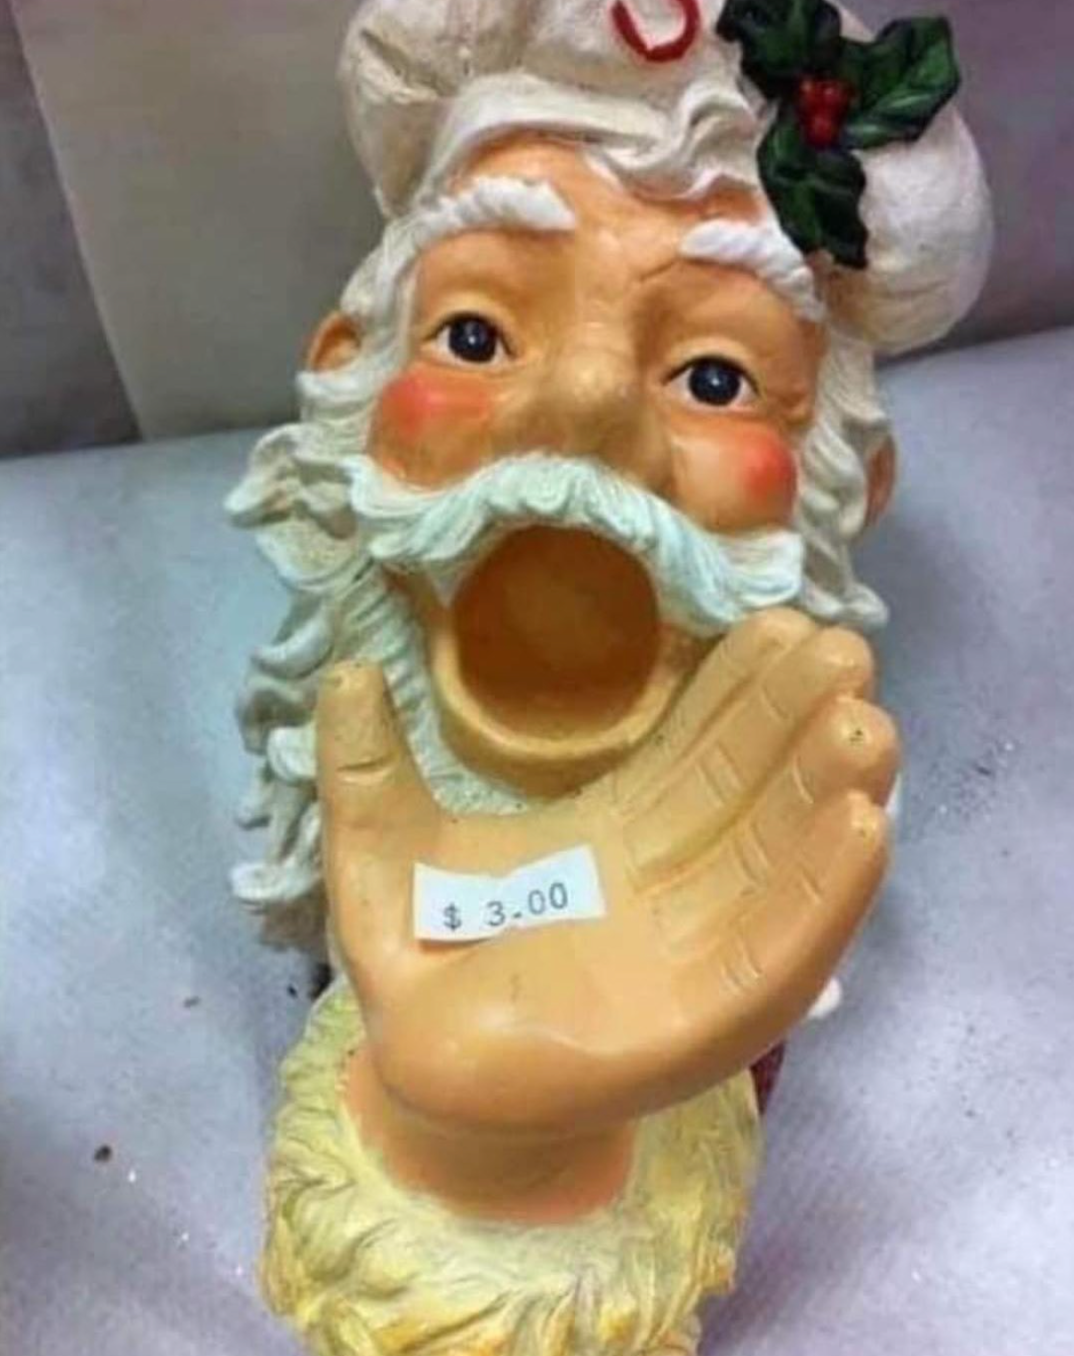 A ceramic Santa decoration, featuring Santa with a big white beard and hat looking up with his mouth wide open. His hand is outstretched in front of him with a price sticker that reads "$3.00."